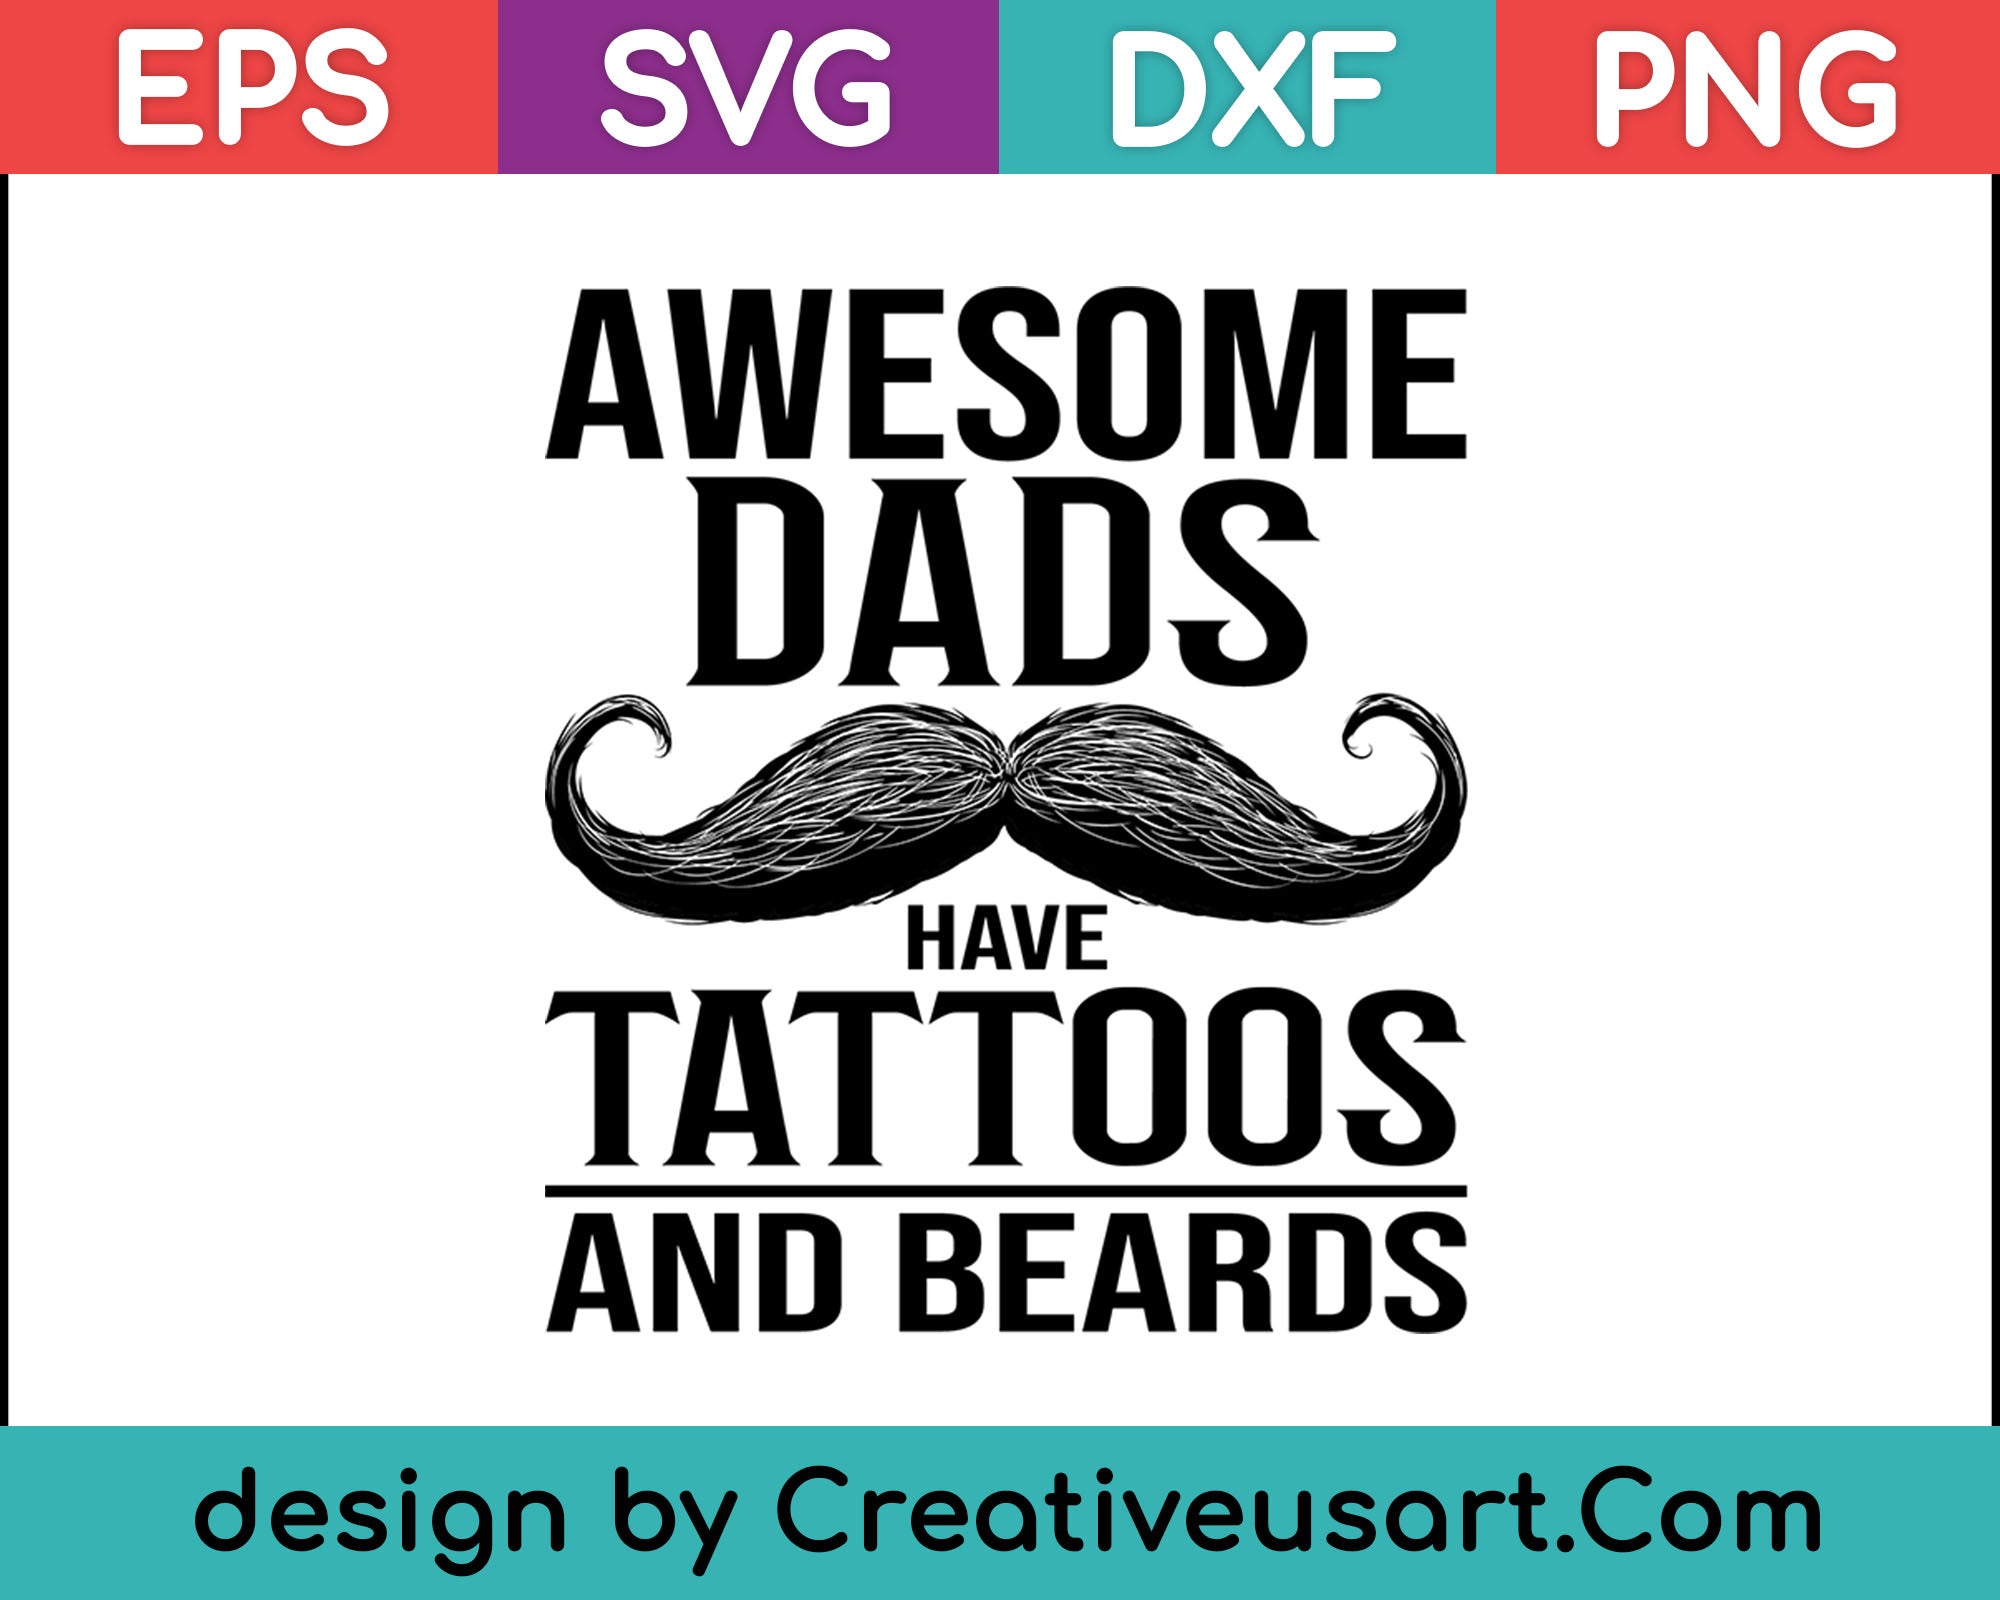 Download Awesome Dads Have Tattoos and Beards T Shirt Fathers Day SVG Files - creativeusart